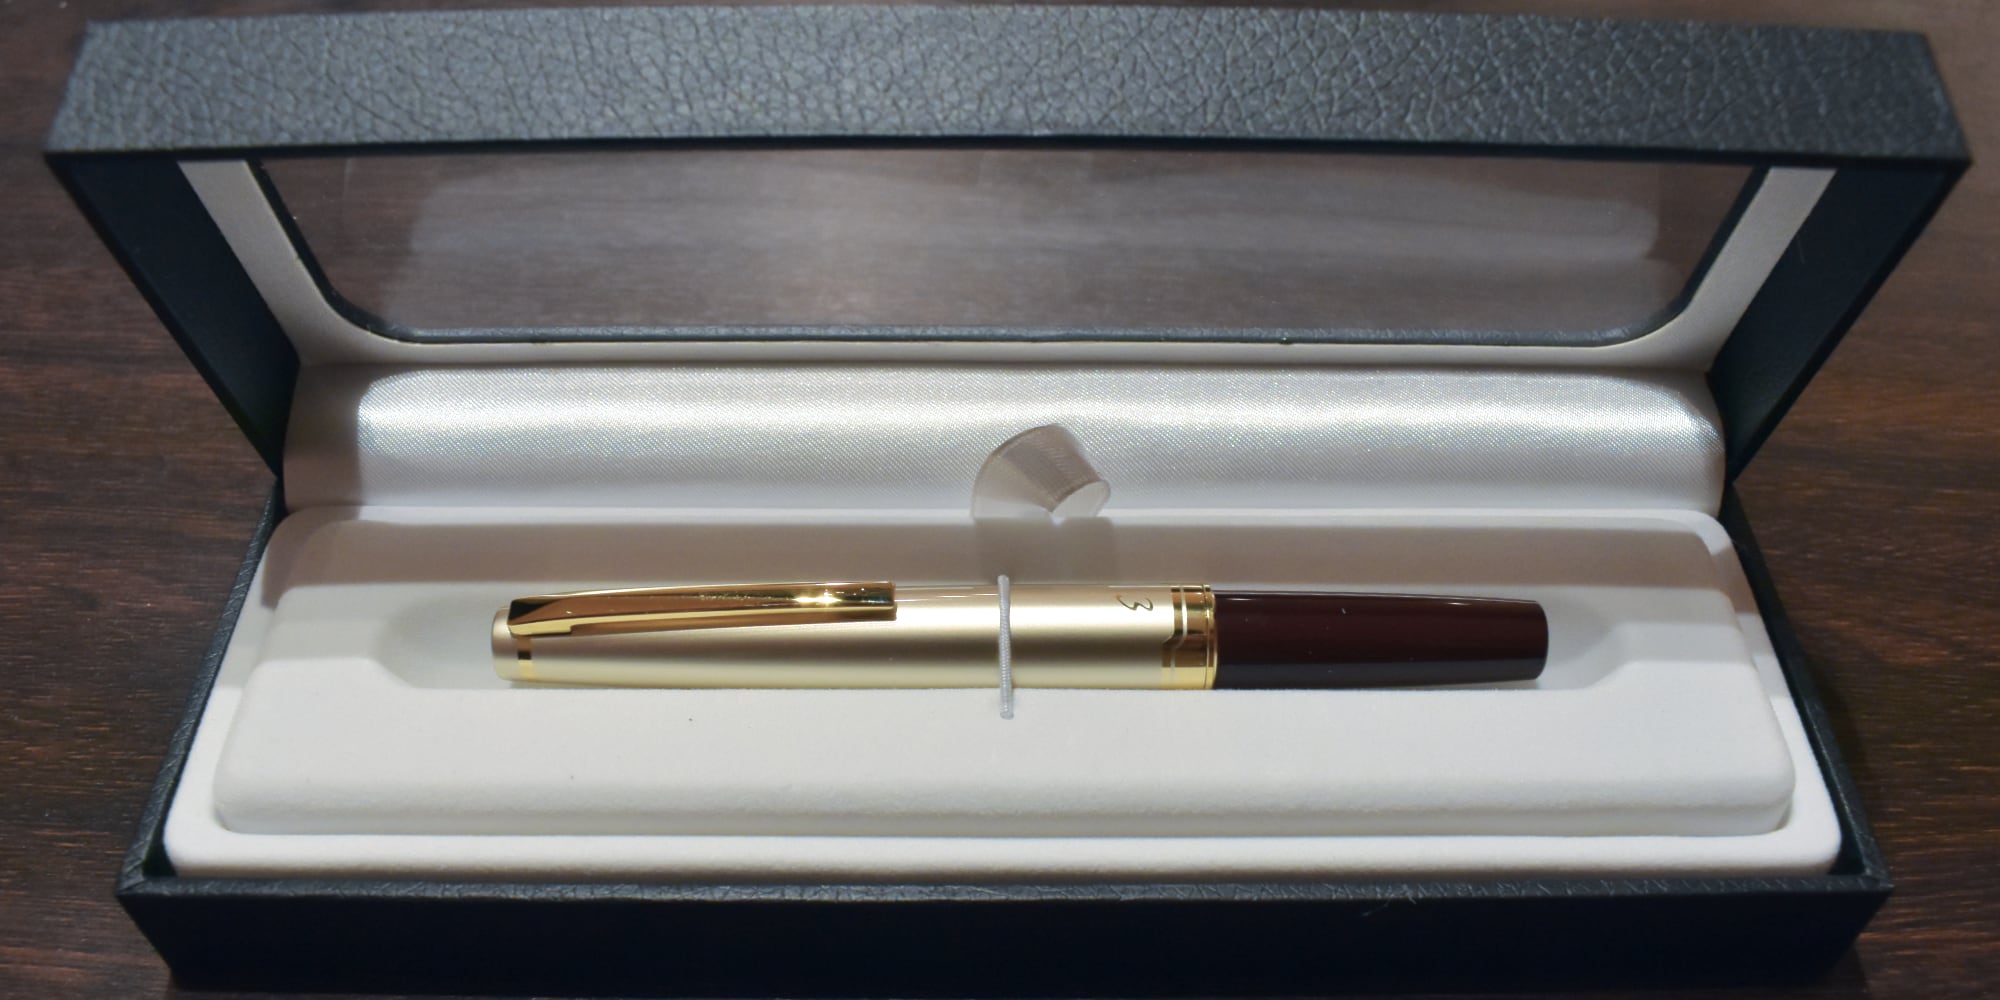 Pilot E95s boxed; the Vanishing Point comes in the same box